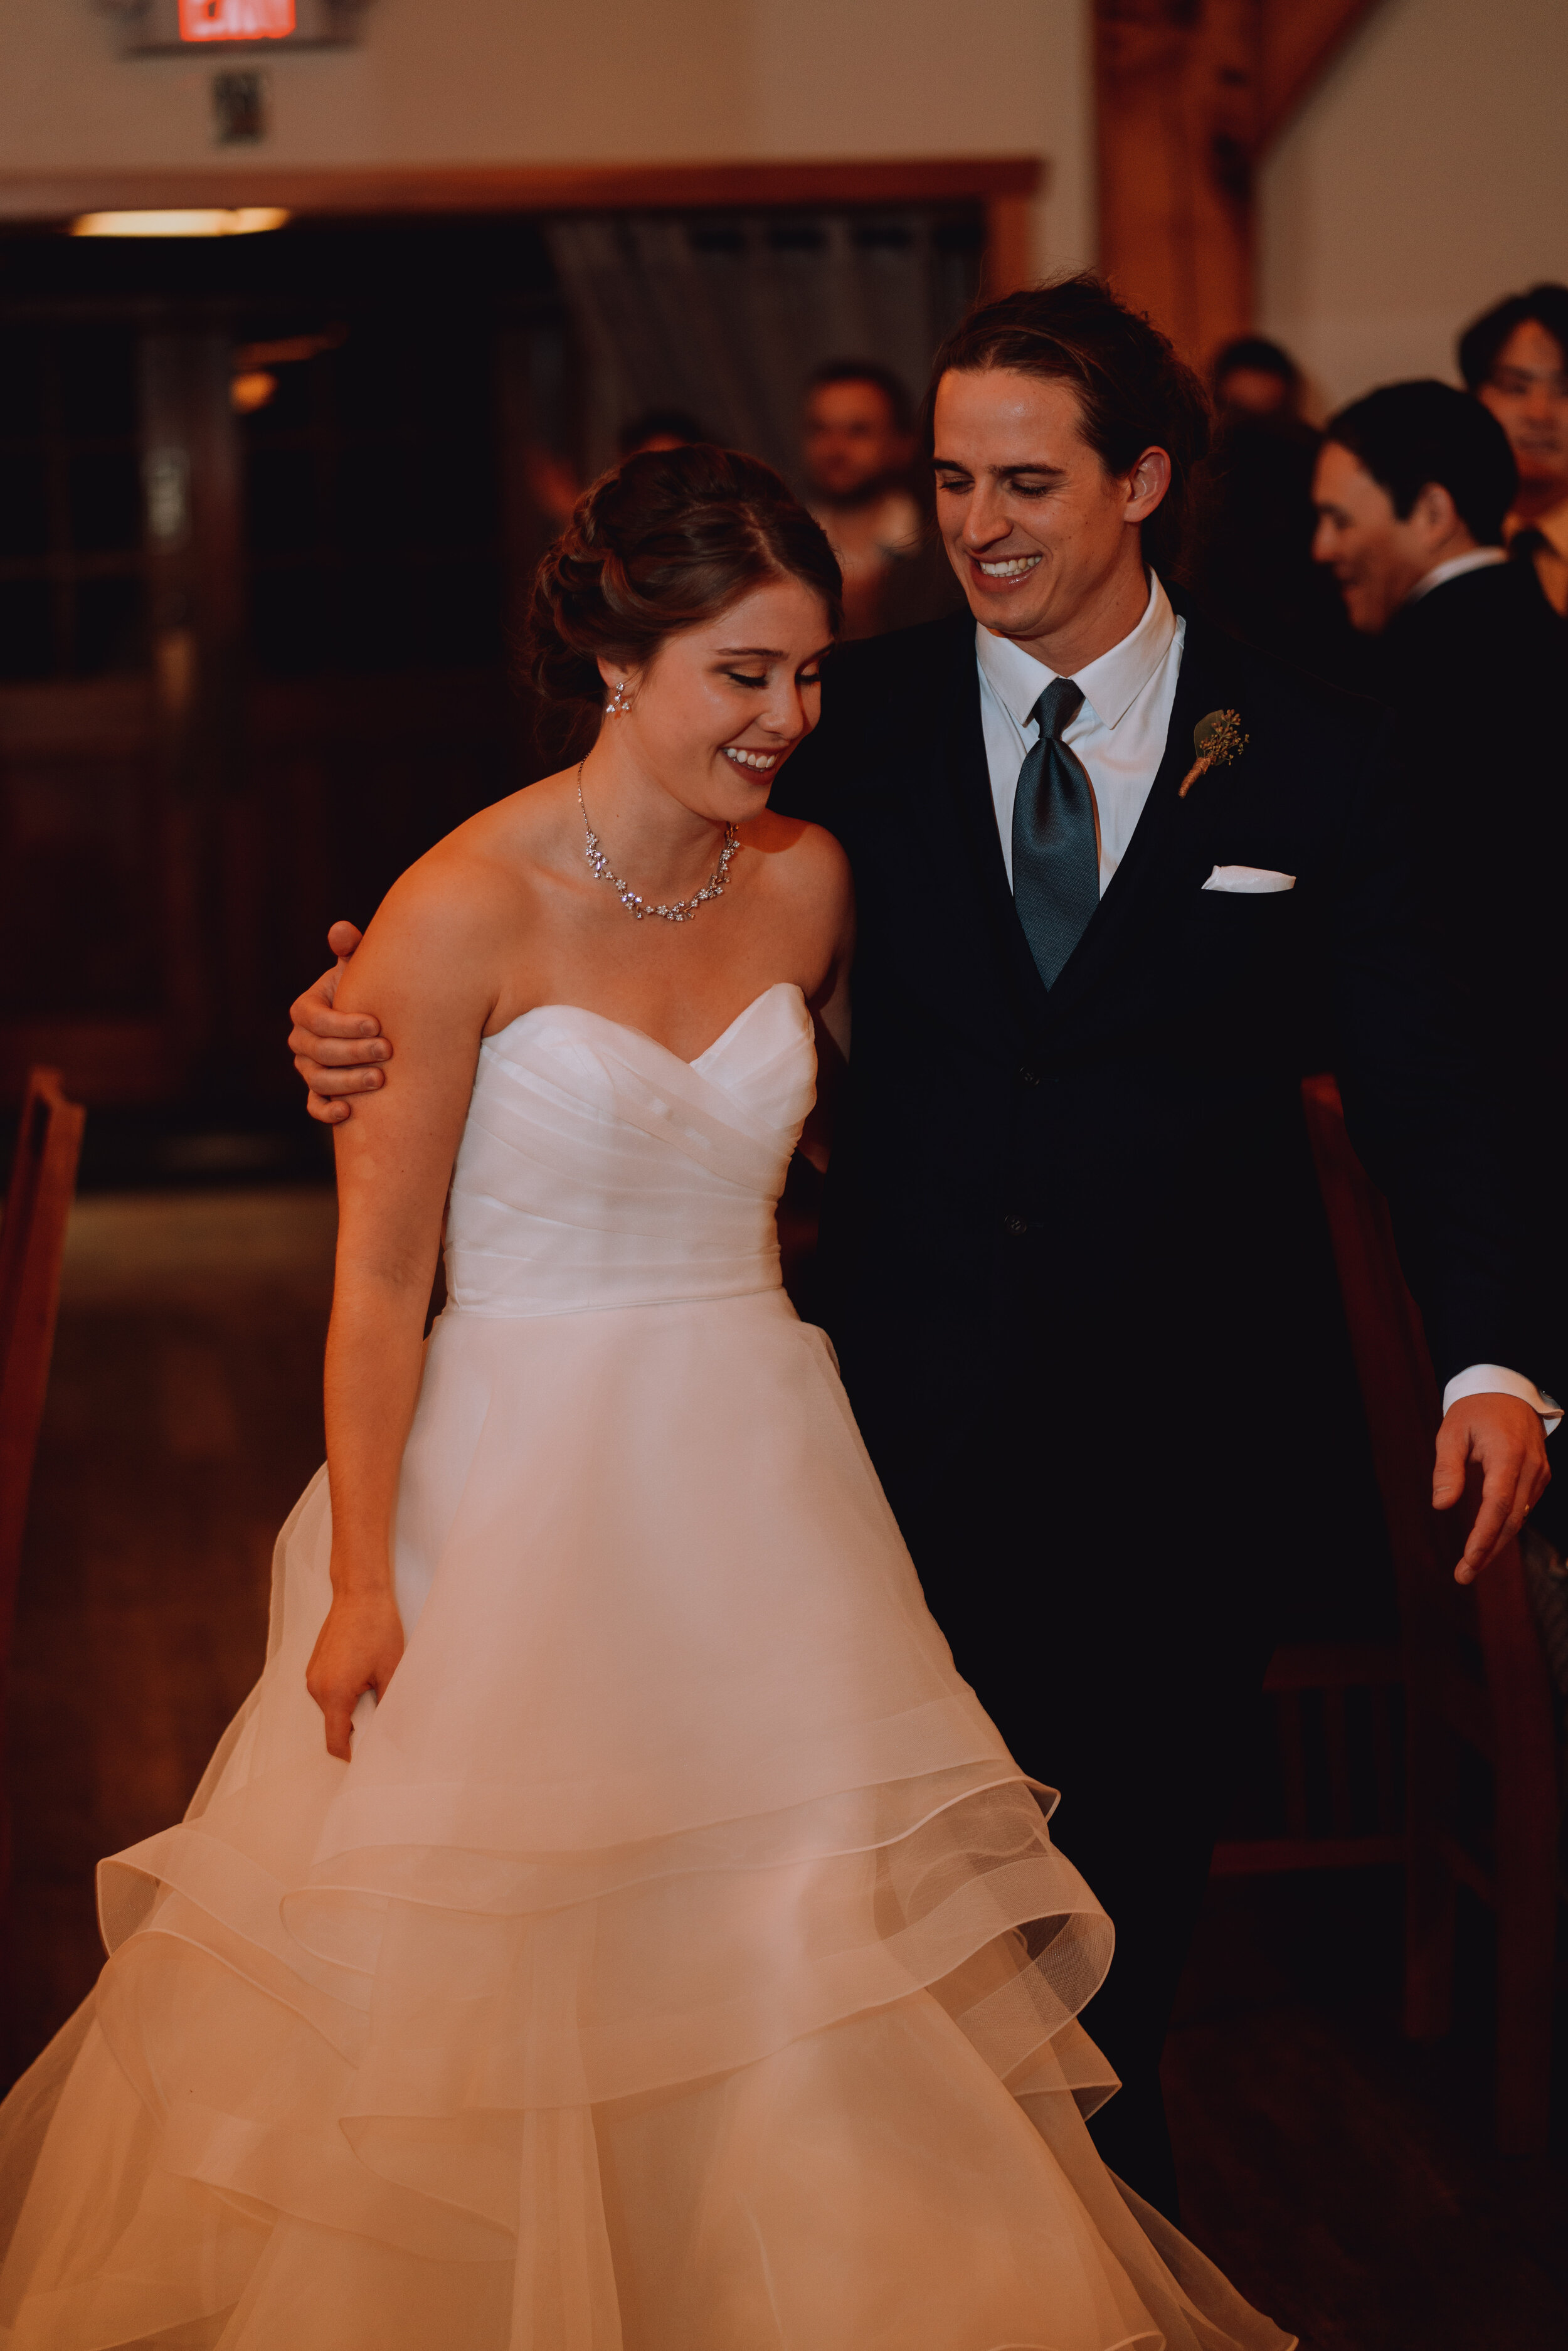 Wedding Hannah and Aaron at Timberlodge in Buffalo NY by Stefan Ludwig Photography-547.jpg